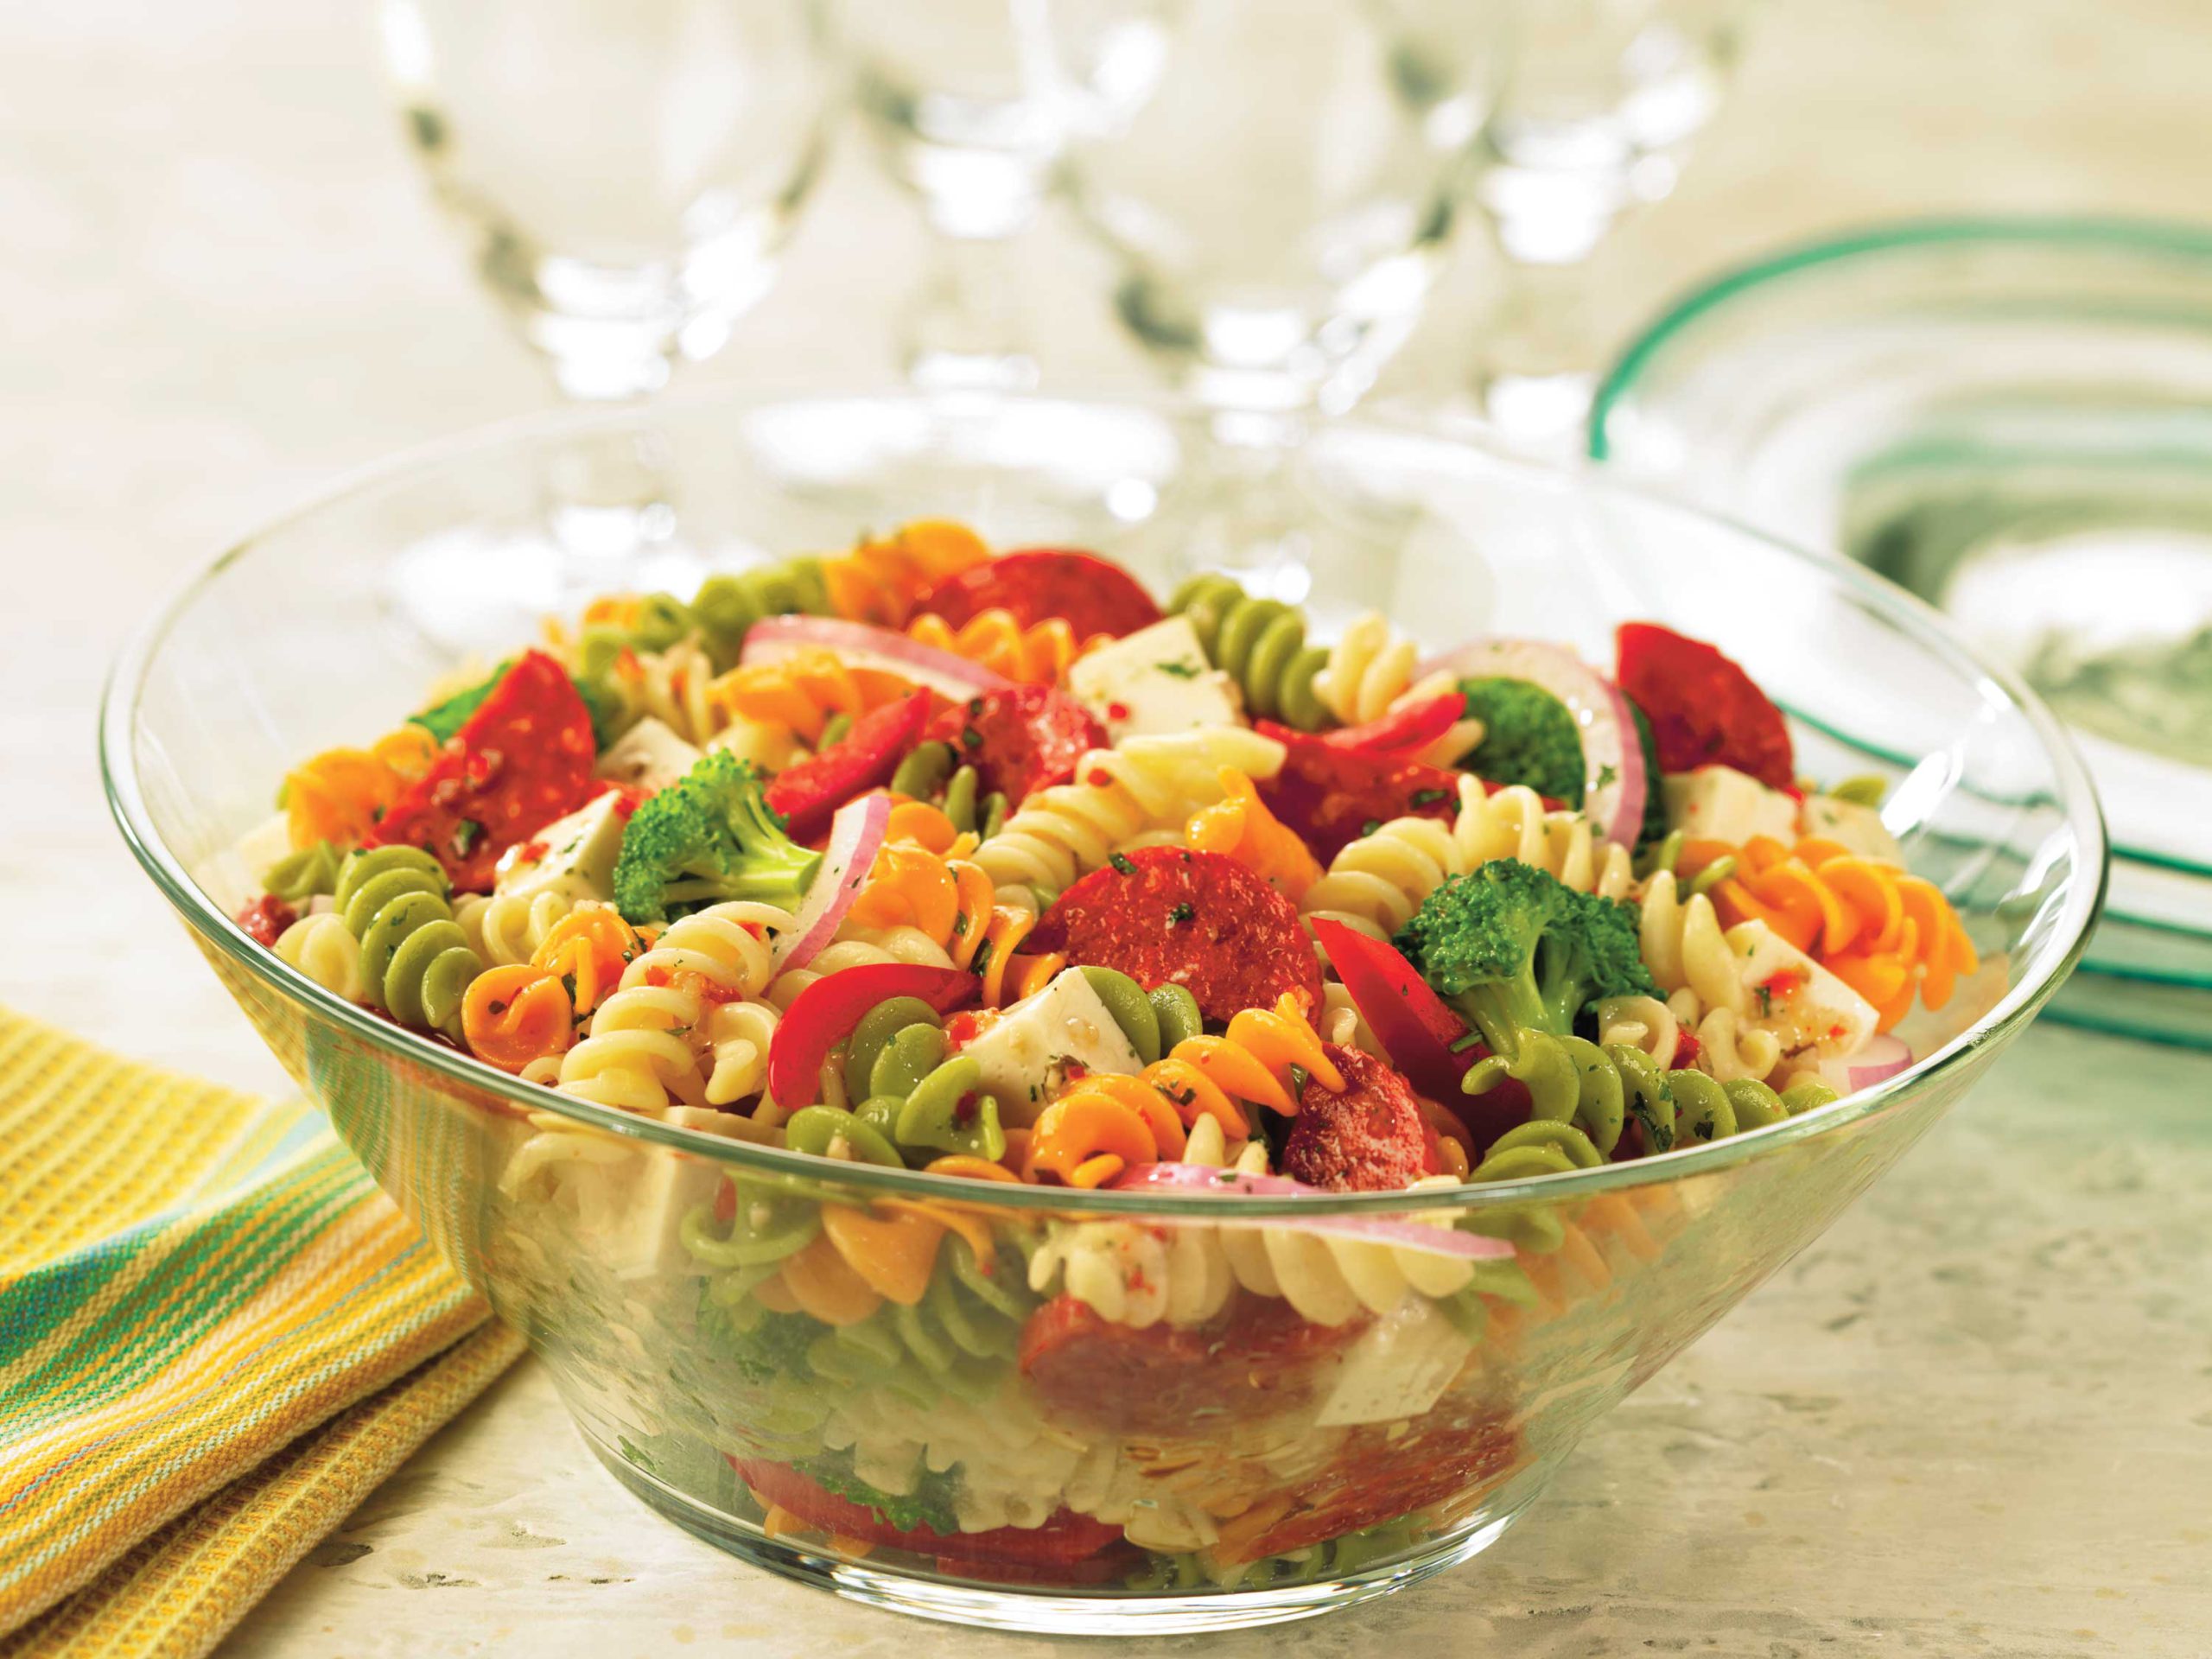 Pepperoni, mozzarella, and vegetables combine for an Italian-inspired pasta salad that’s easy and quick to pull together.